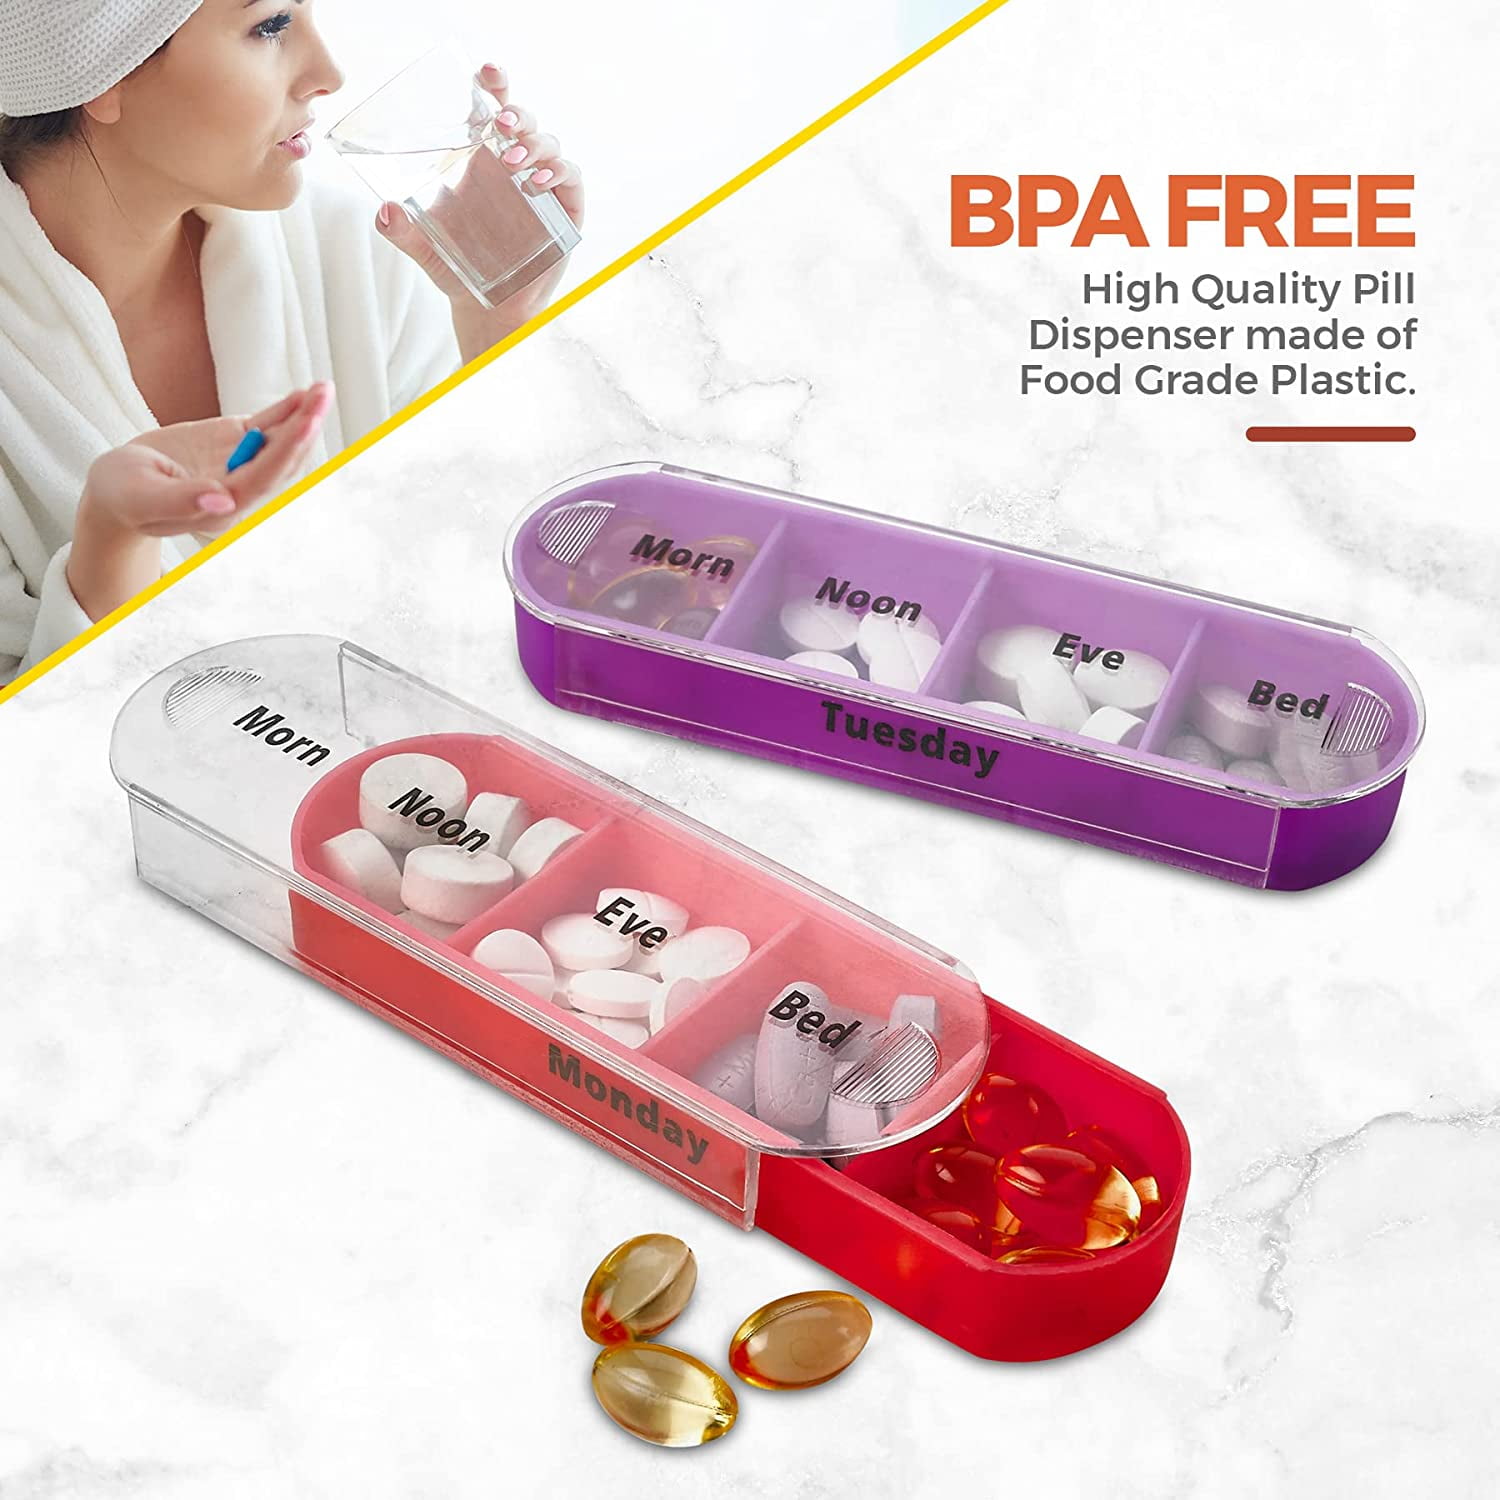 MEDca Pill Case and Pills Bottle Organizer - Weekly and Daily by